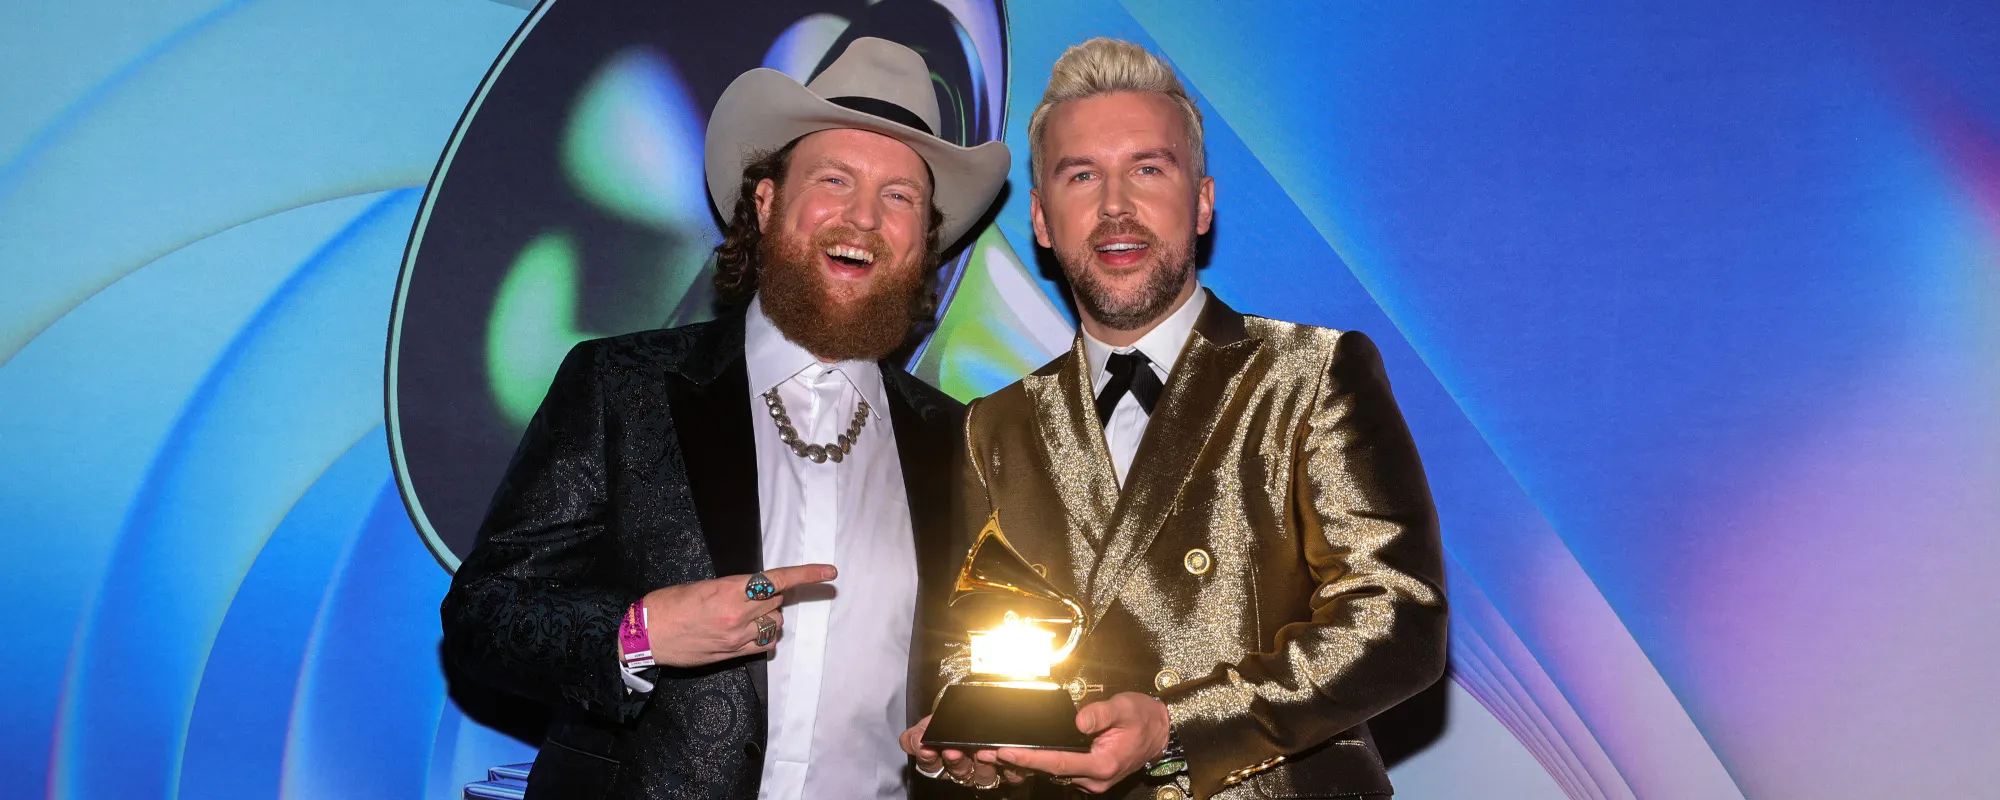 Brothers Osborne Win Grammy for Song About Coming Out